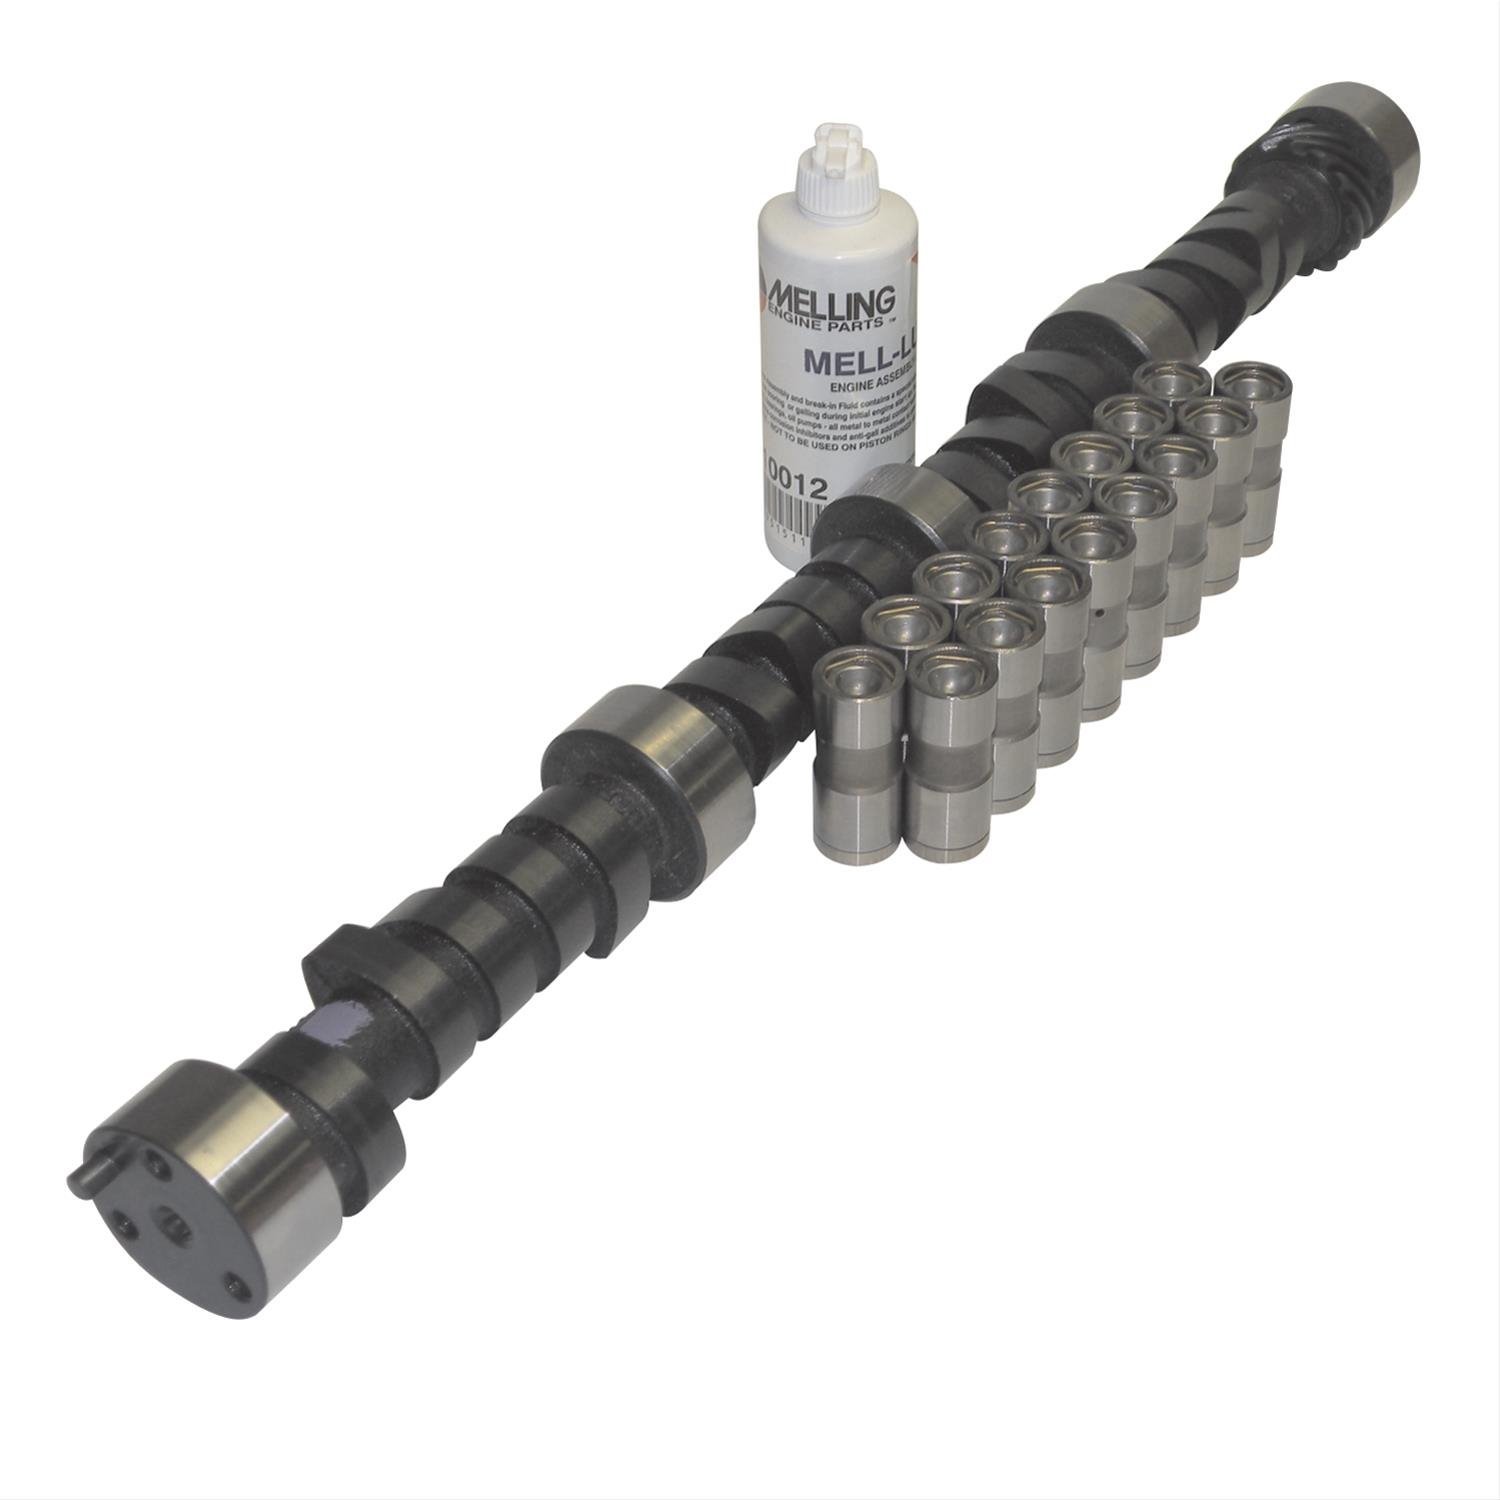 Camshaft and Lifter Kit for Select 1957-1996 GM Engines